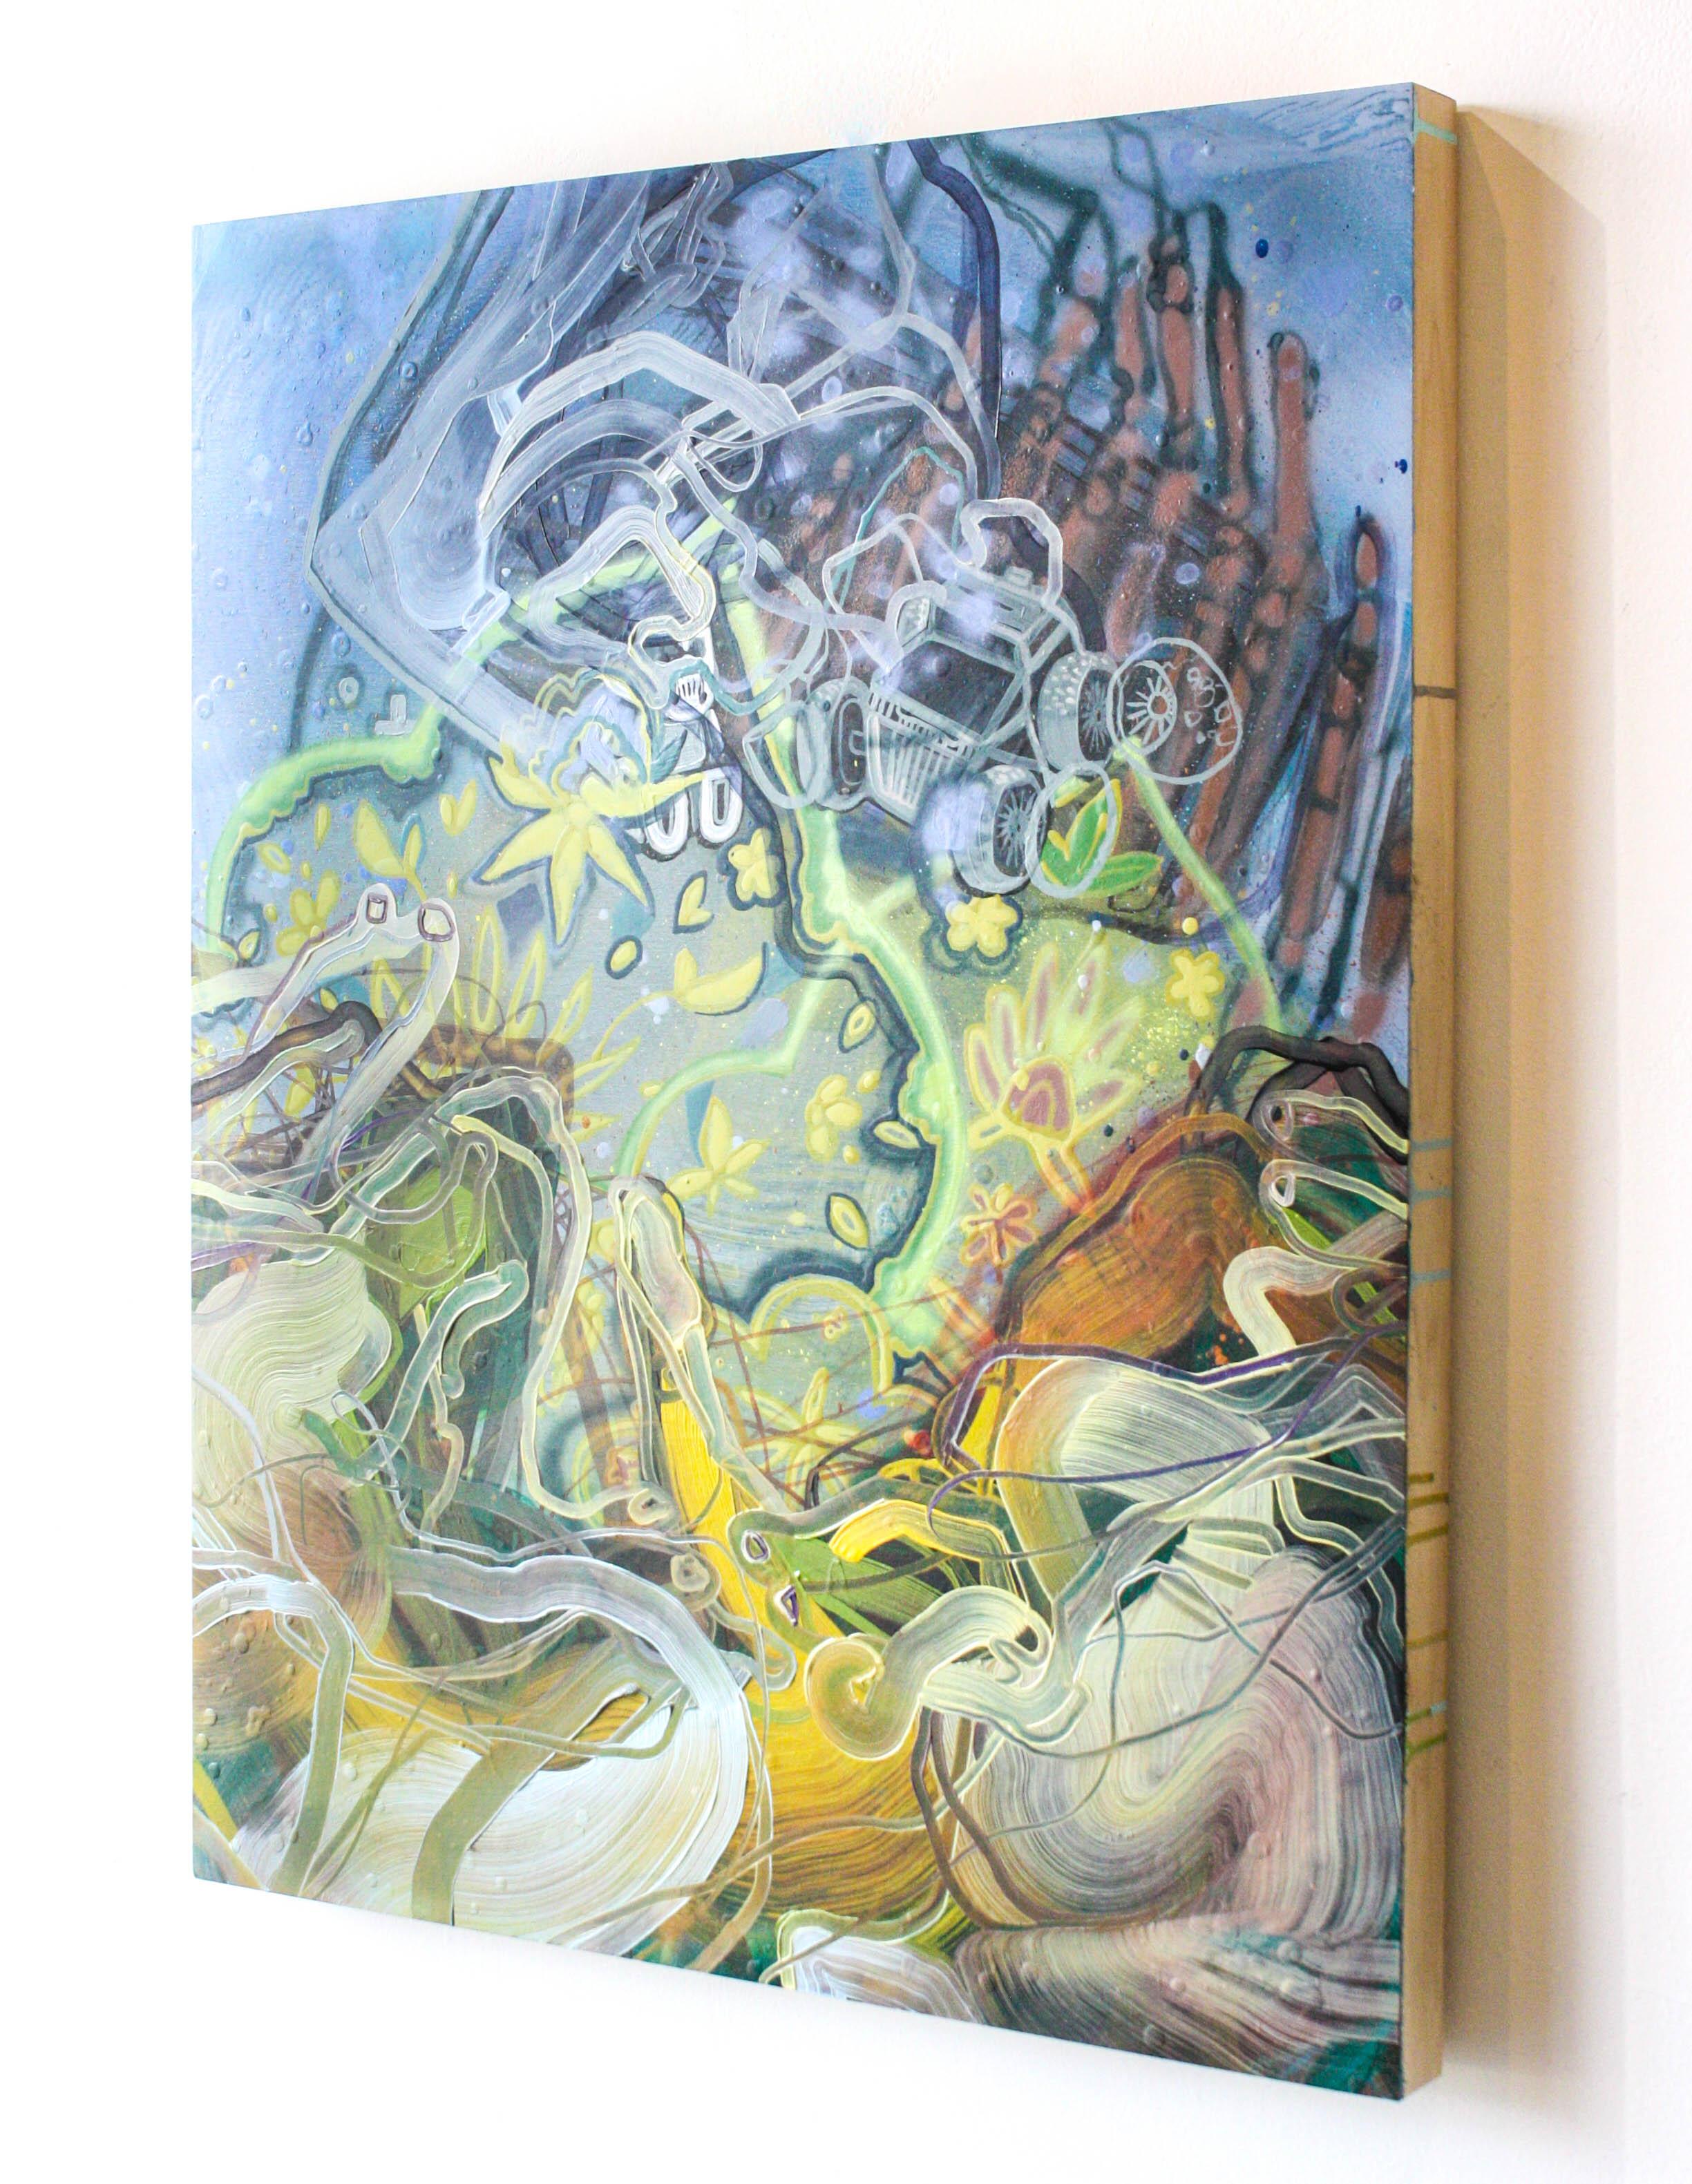 Couch Ledge- Abstract, Acrylic, Oil, Panel, Spray Paint, Blue, Green, Yellow - Painting by Dana Oldfather